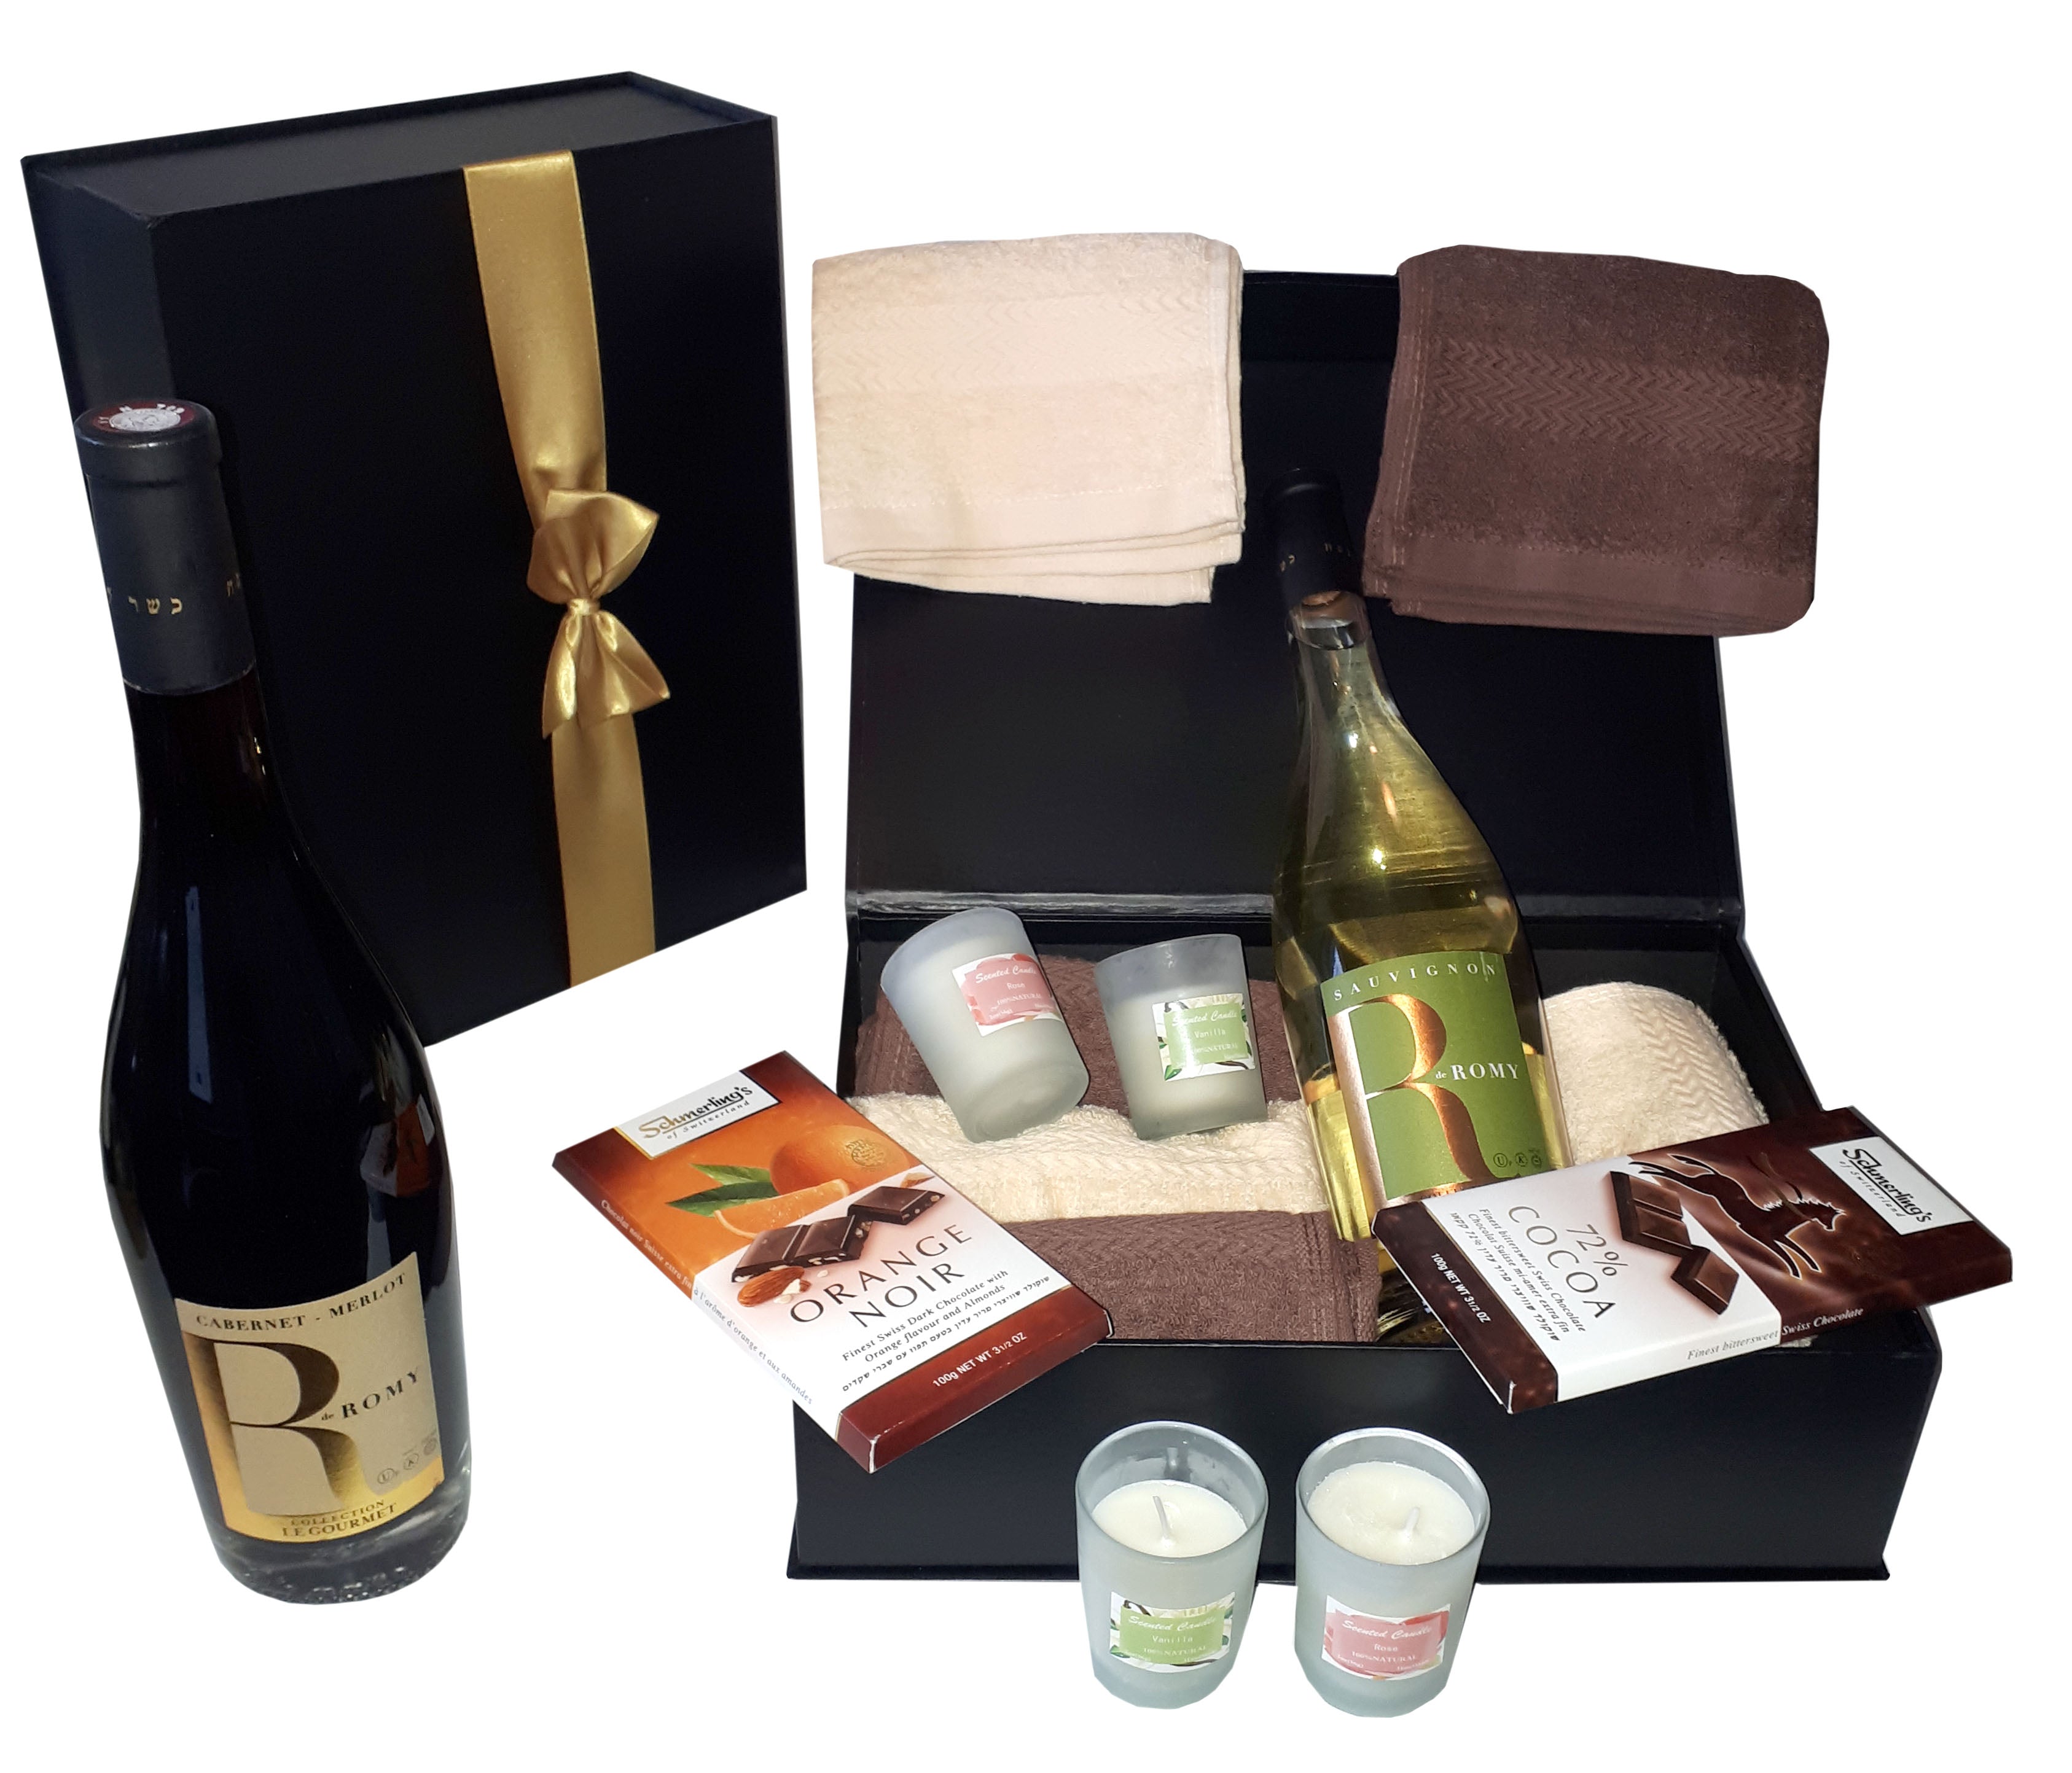 Shana Tova New Home Guest Luxury Bathroom Gift For Your Guest, Family Or For You! With French Wine, Christy Guest Towels, Chocolates & Fragrant Candles. Magnetic Closing Gift Box. FREE Standard Delivery UK.